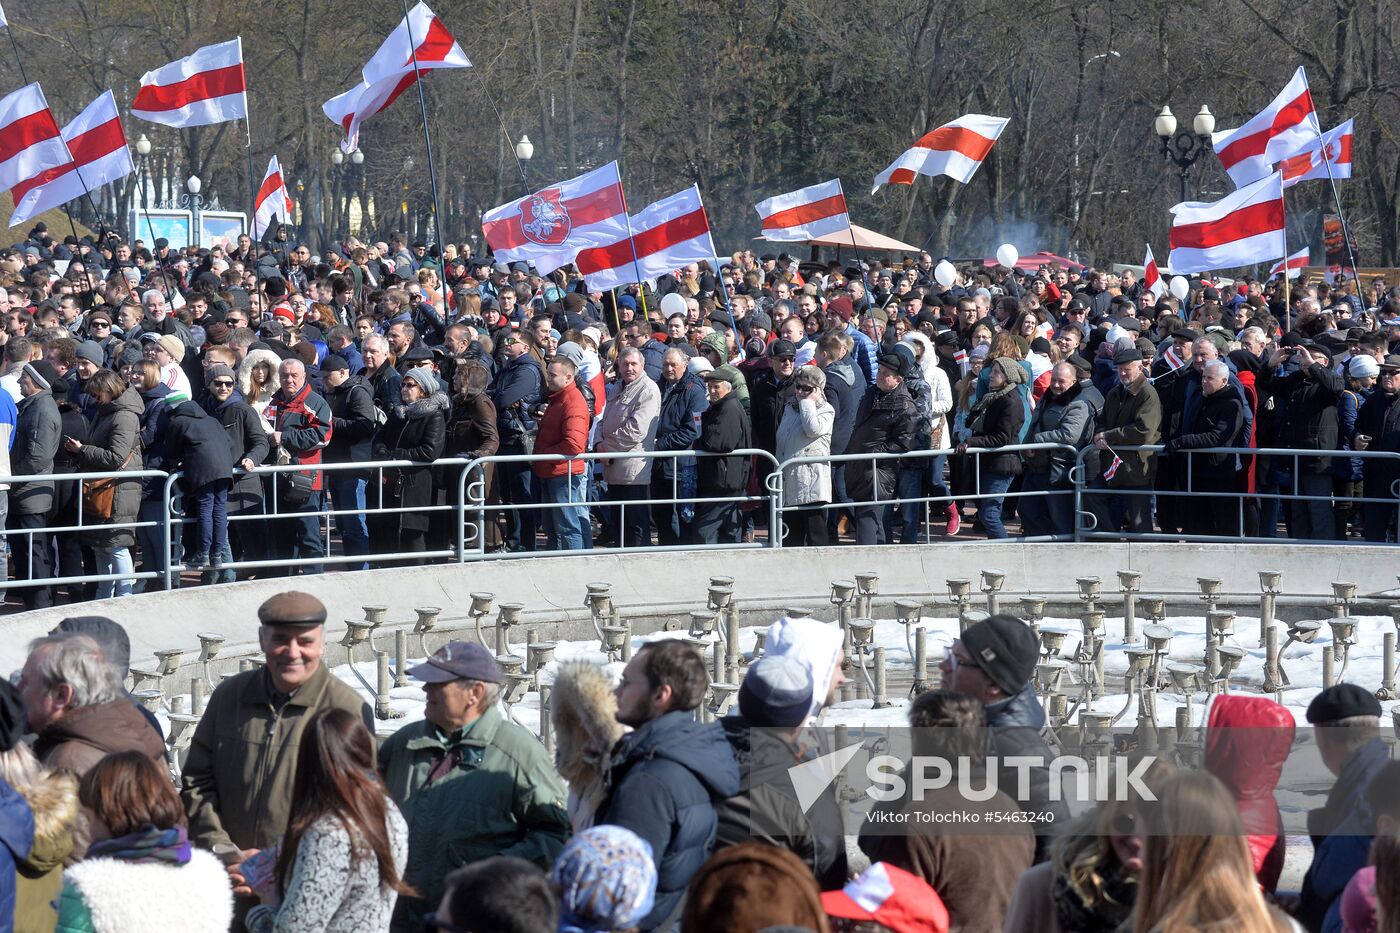 Freedom Day event in Belarus